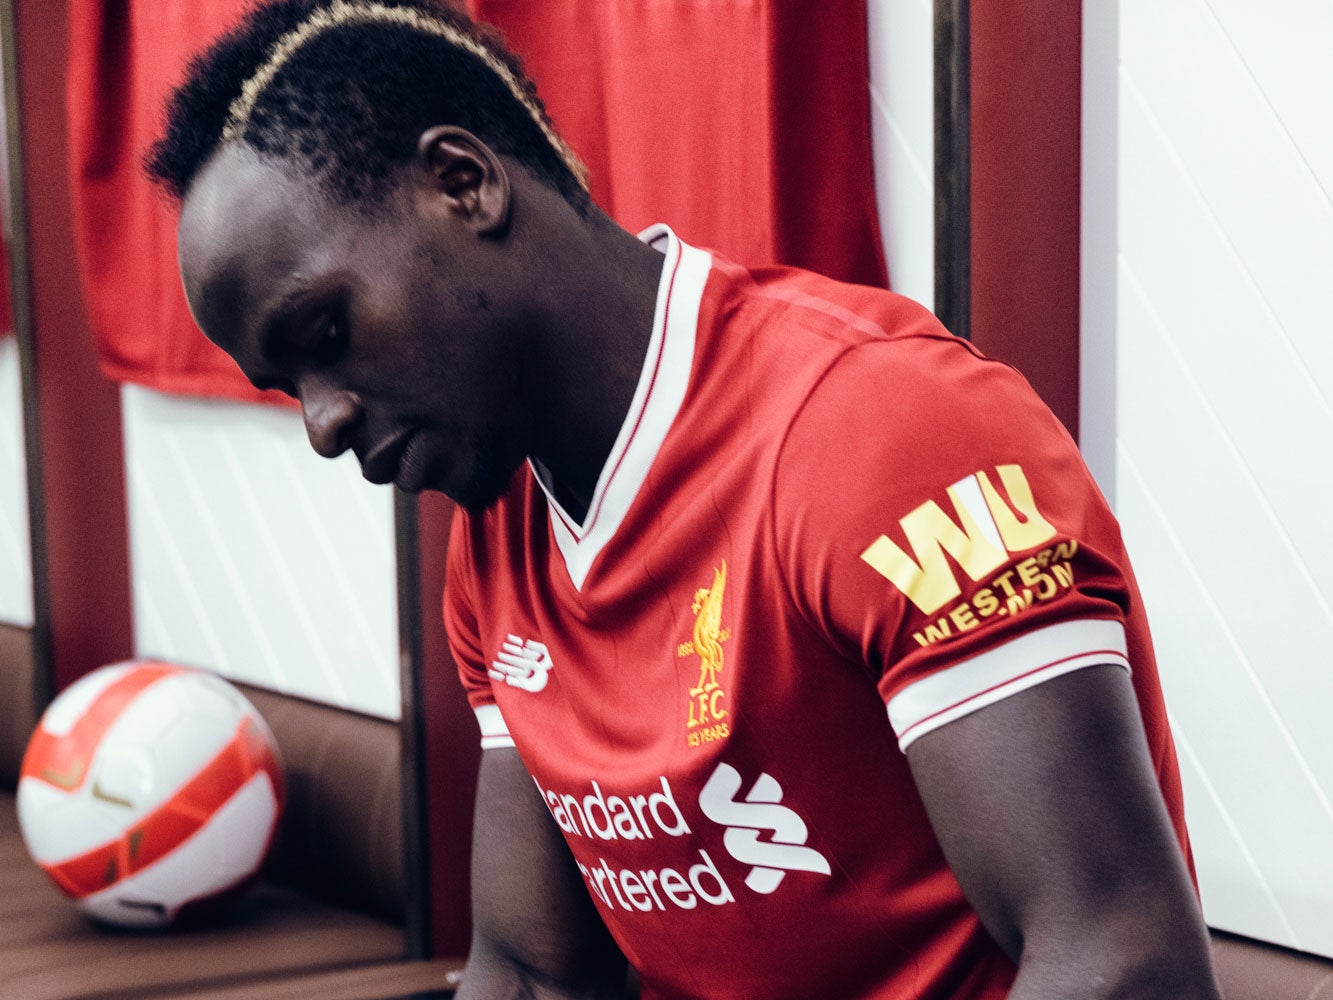 Sadio Mané wearing the Liverpool home kit with new sleeve sponsor